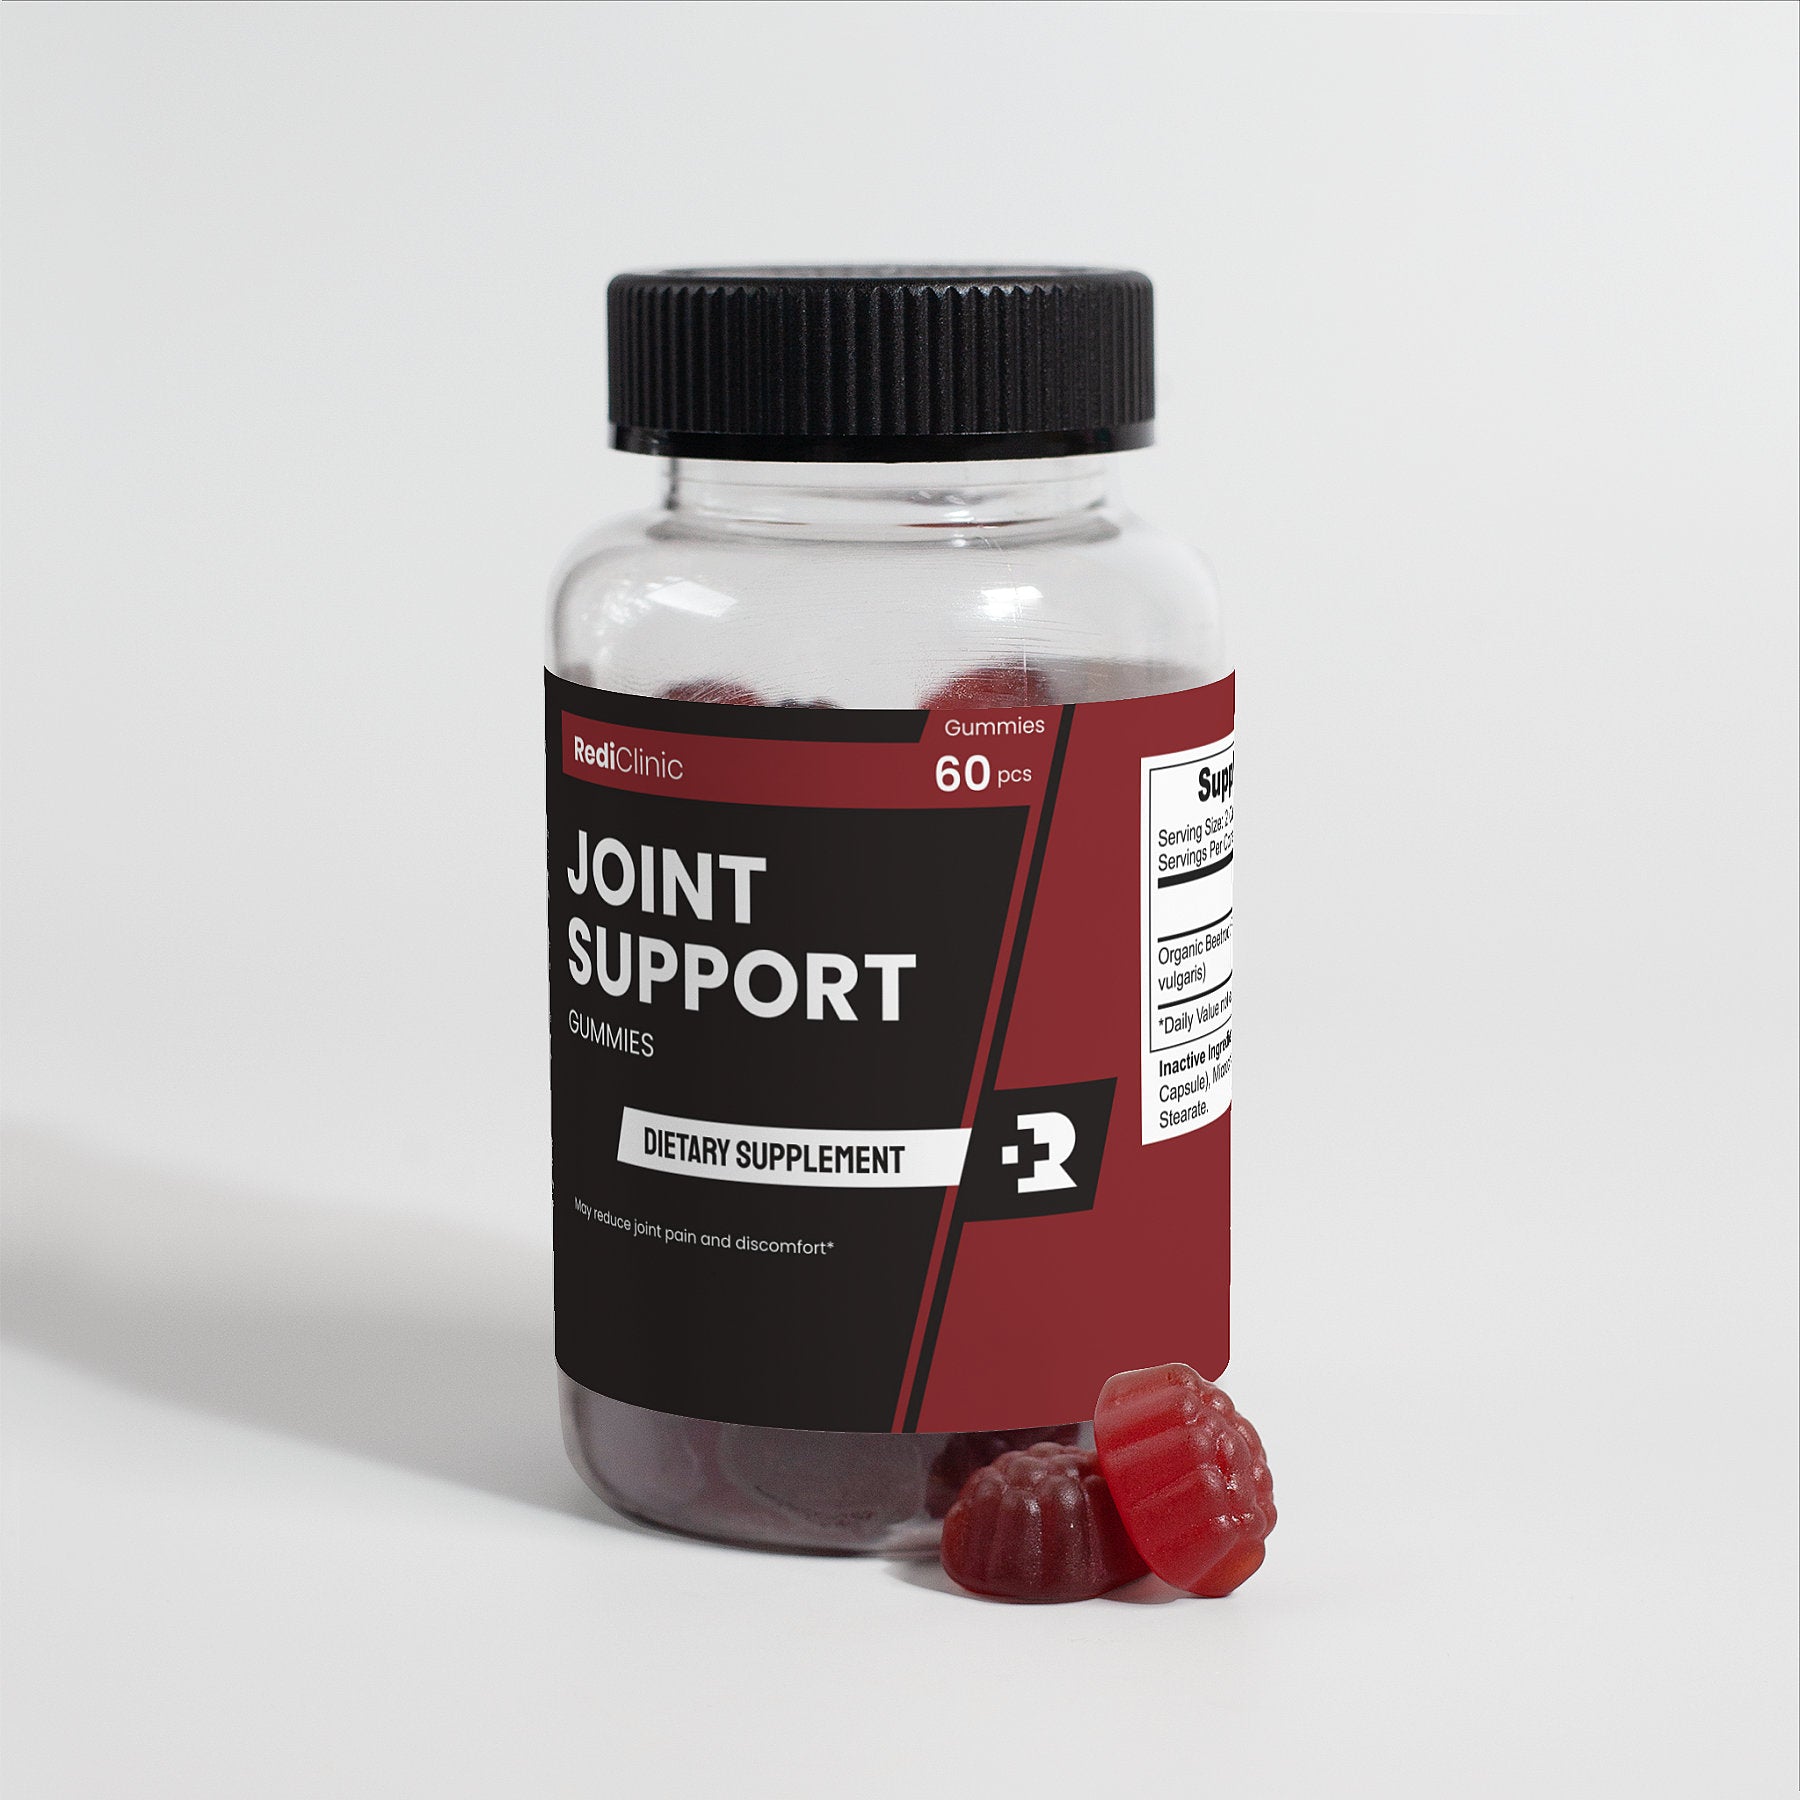 RediClinic Joint Support Gummies For Adults